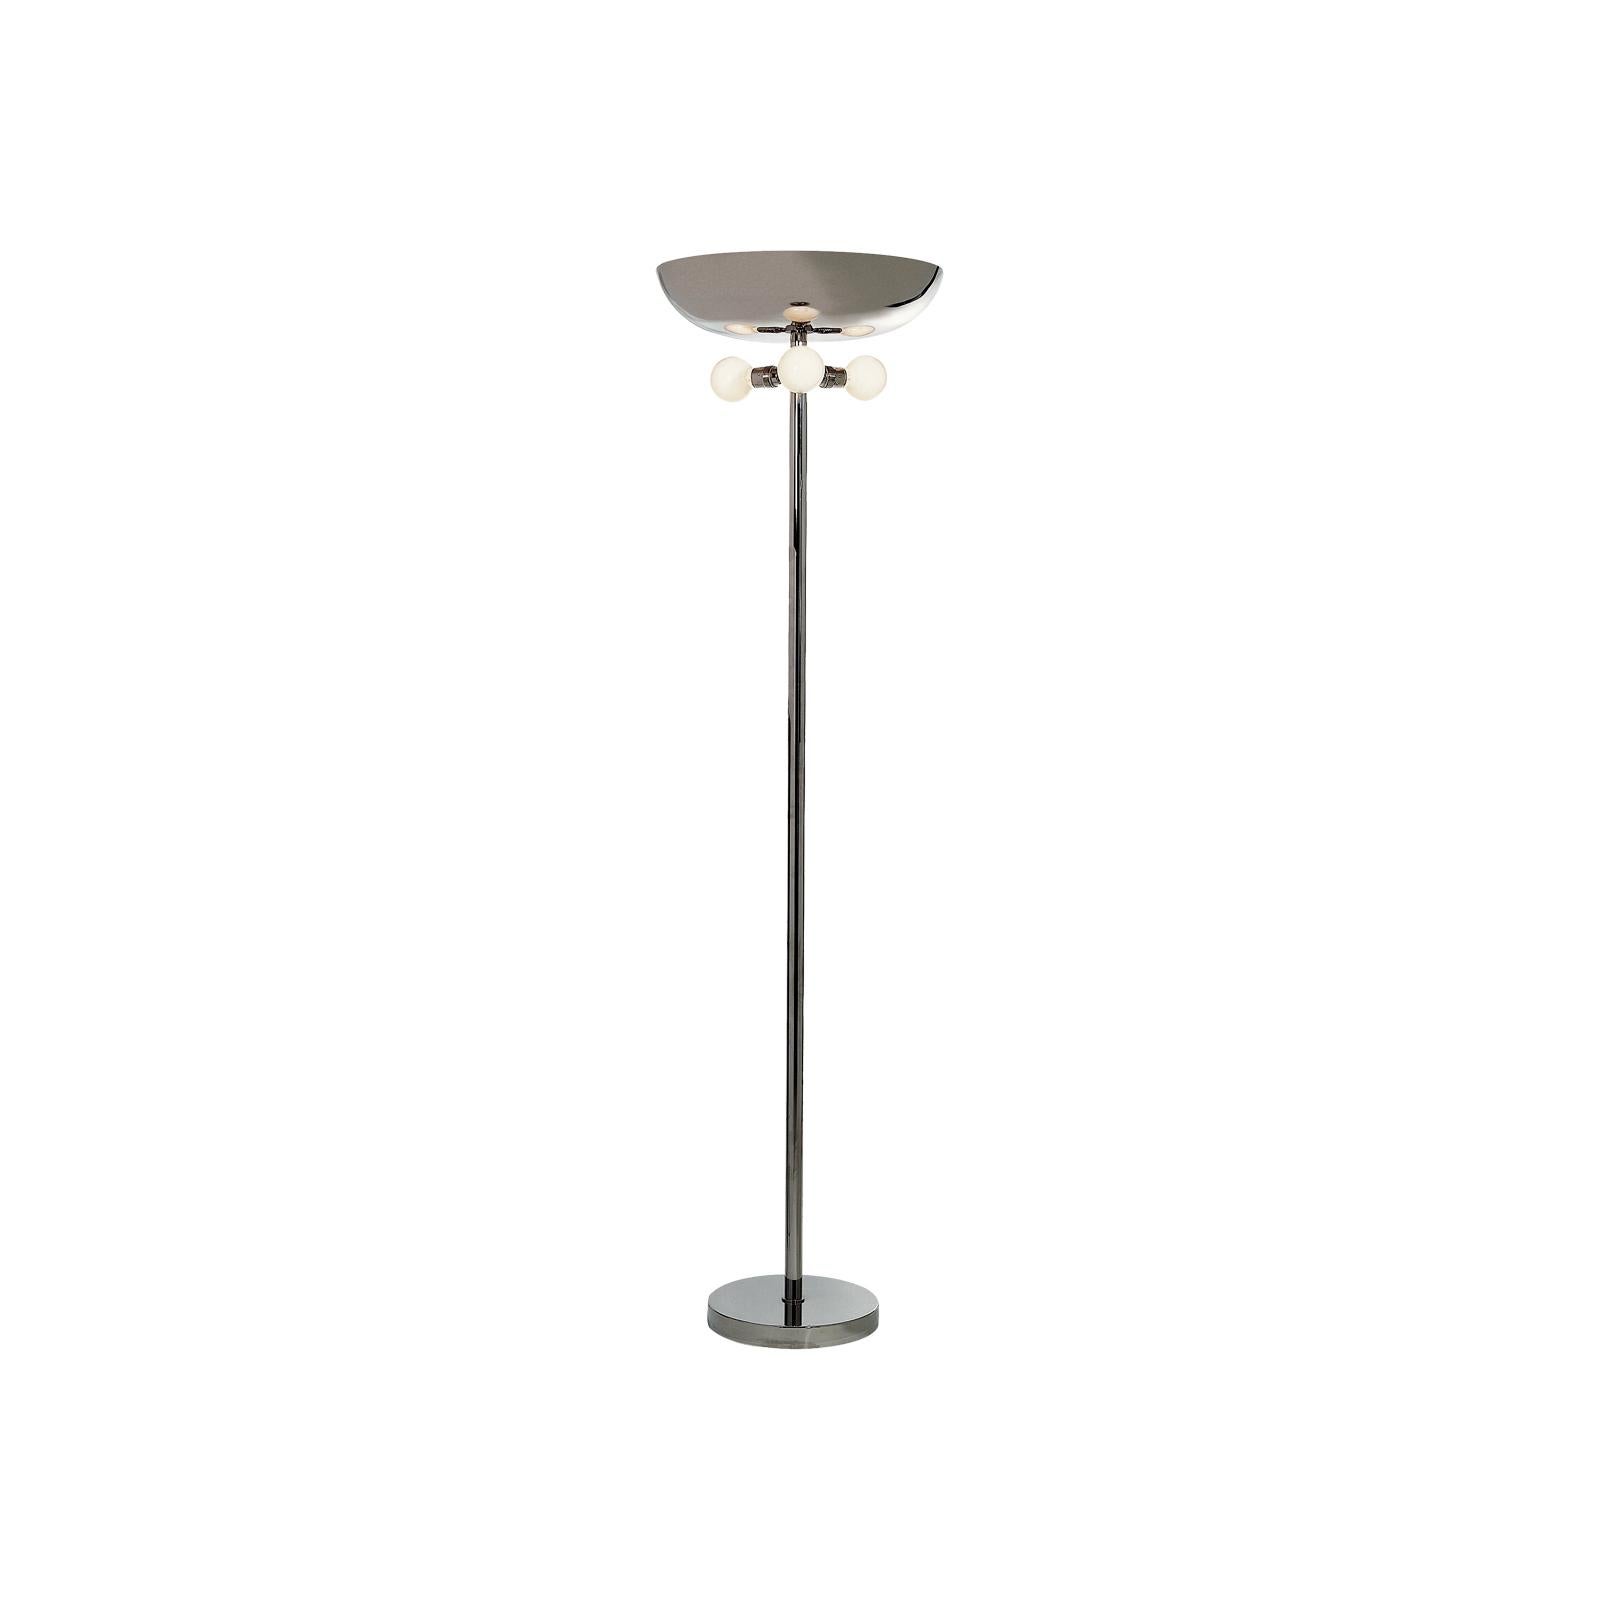 Elegant floor lamp with a torchiere and a room illumination

All components according to the UL regulations, with an additional charge we will UL-list and label our fixtures.